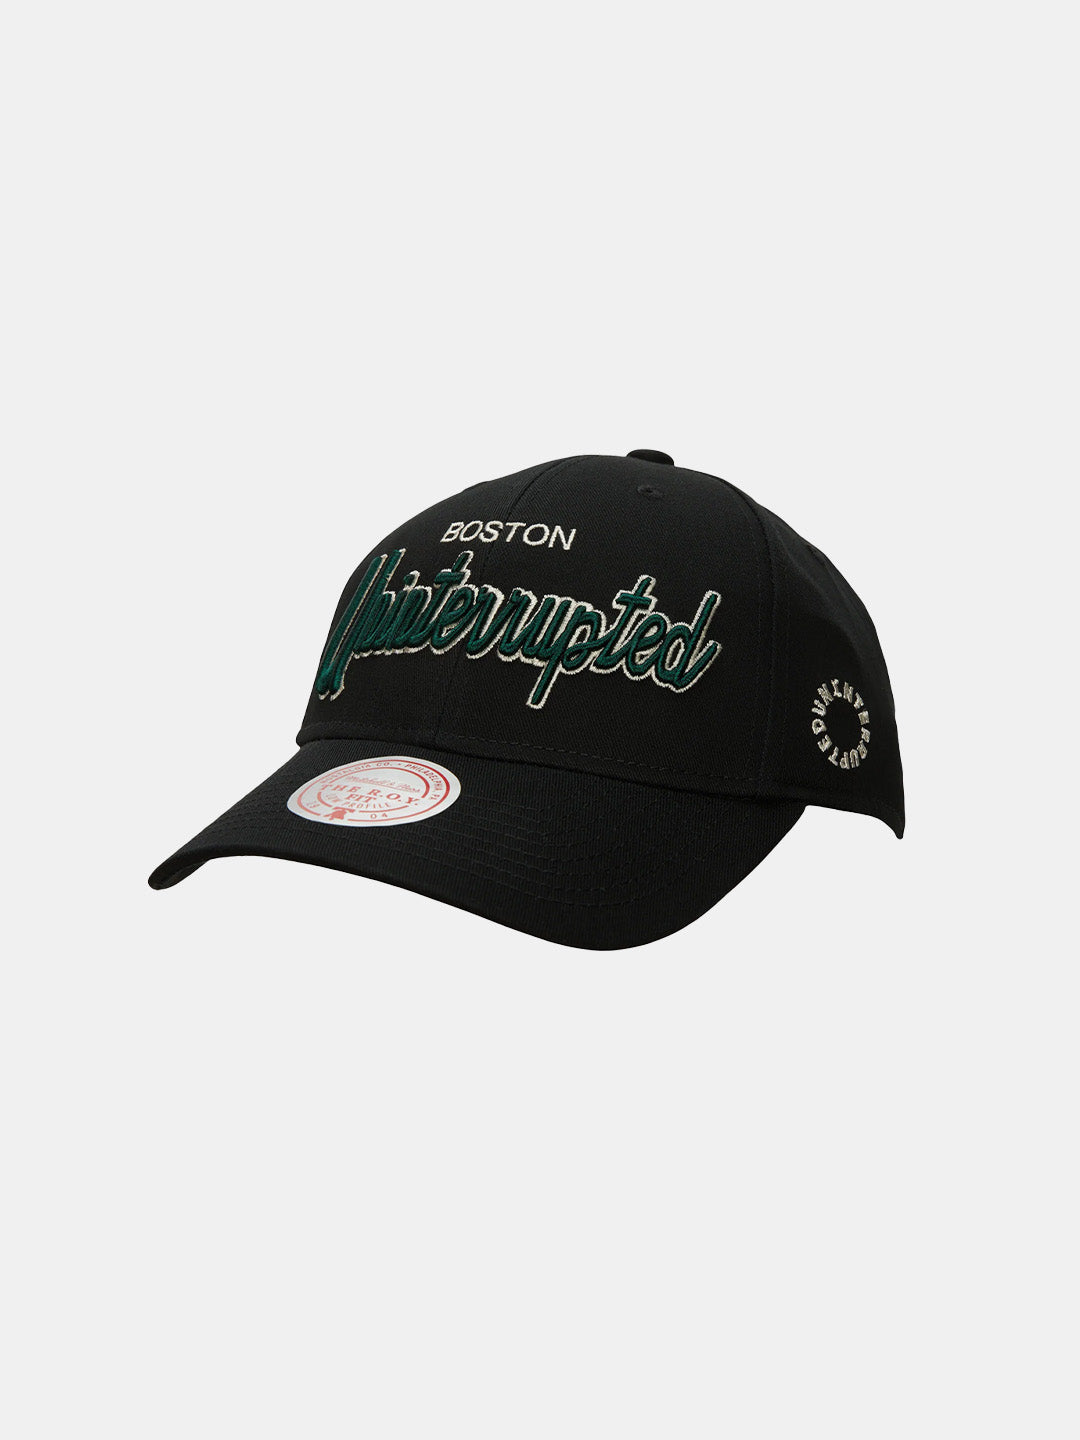 UNINTERRUPTED X Mitchell & Ness Legends Hat Celtics - front view of the black hat